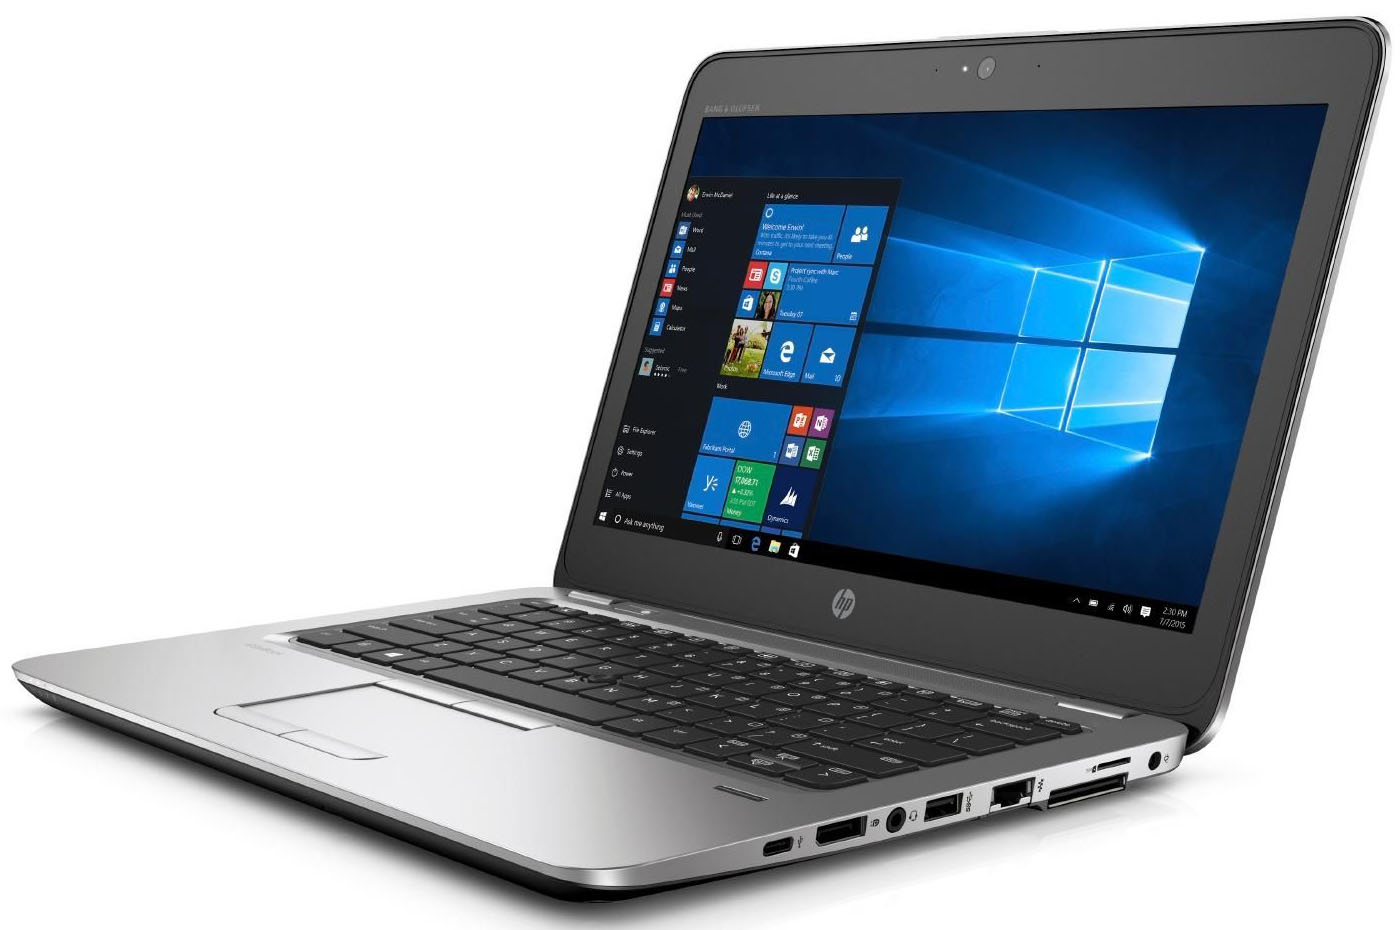 HP G4 - Tests, and Prices | LaptopMedia.com